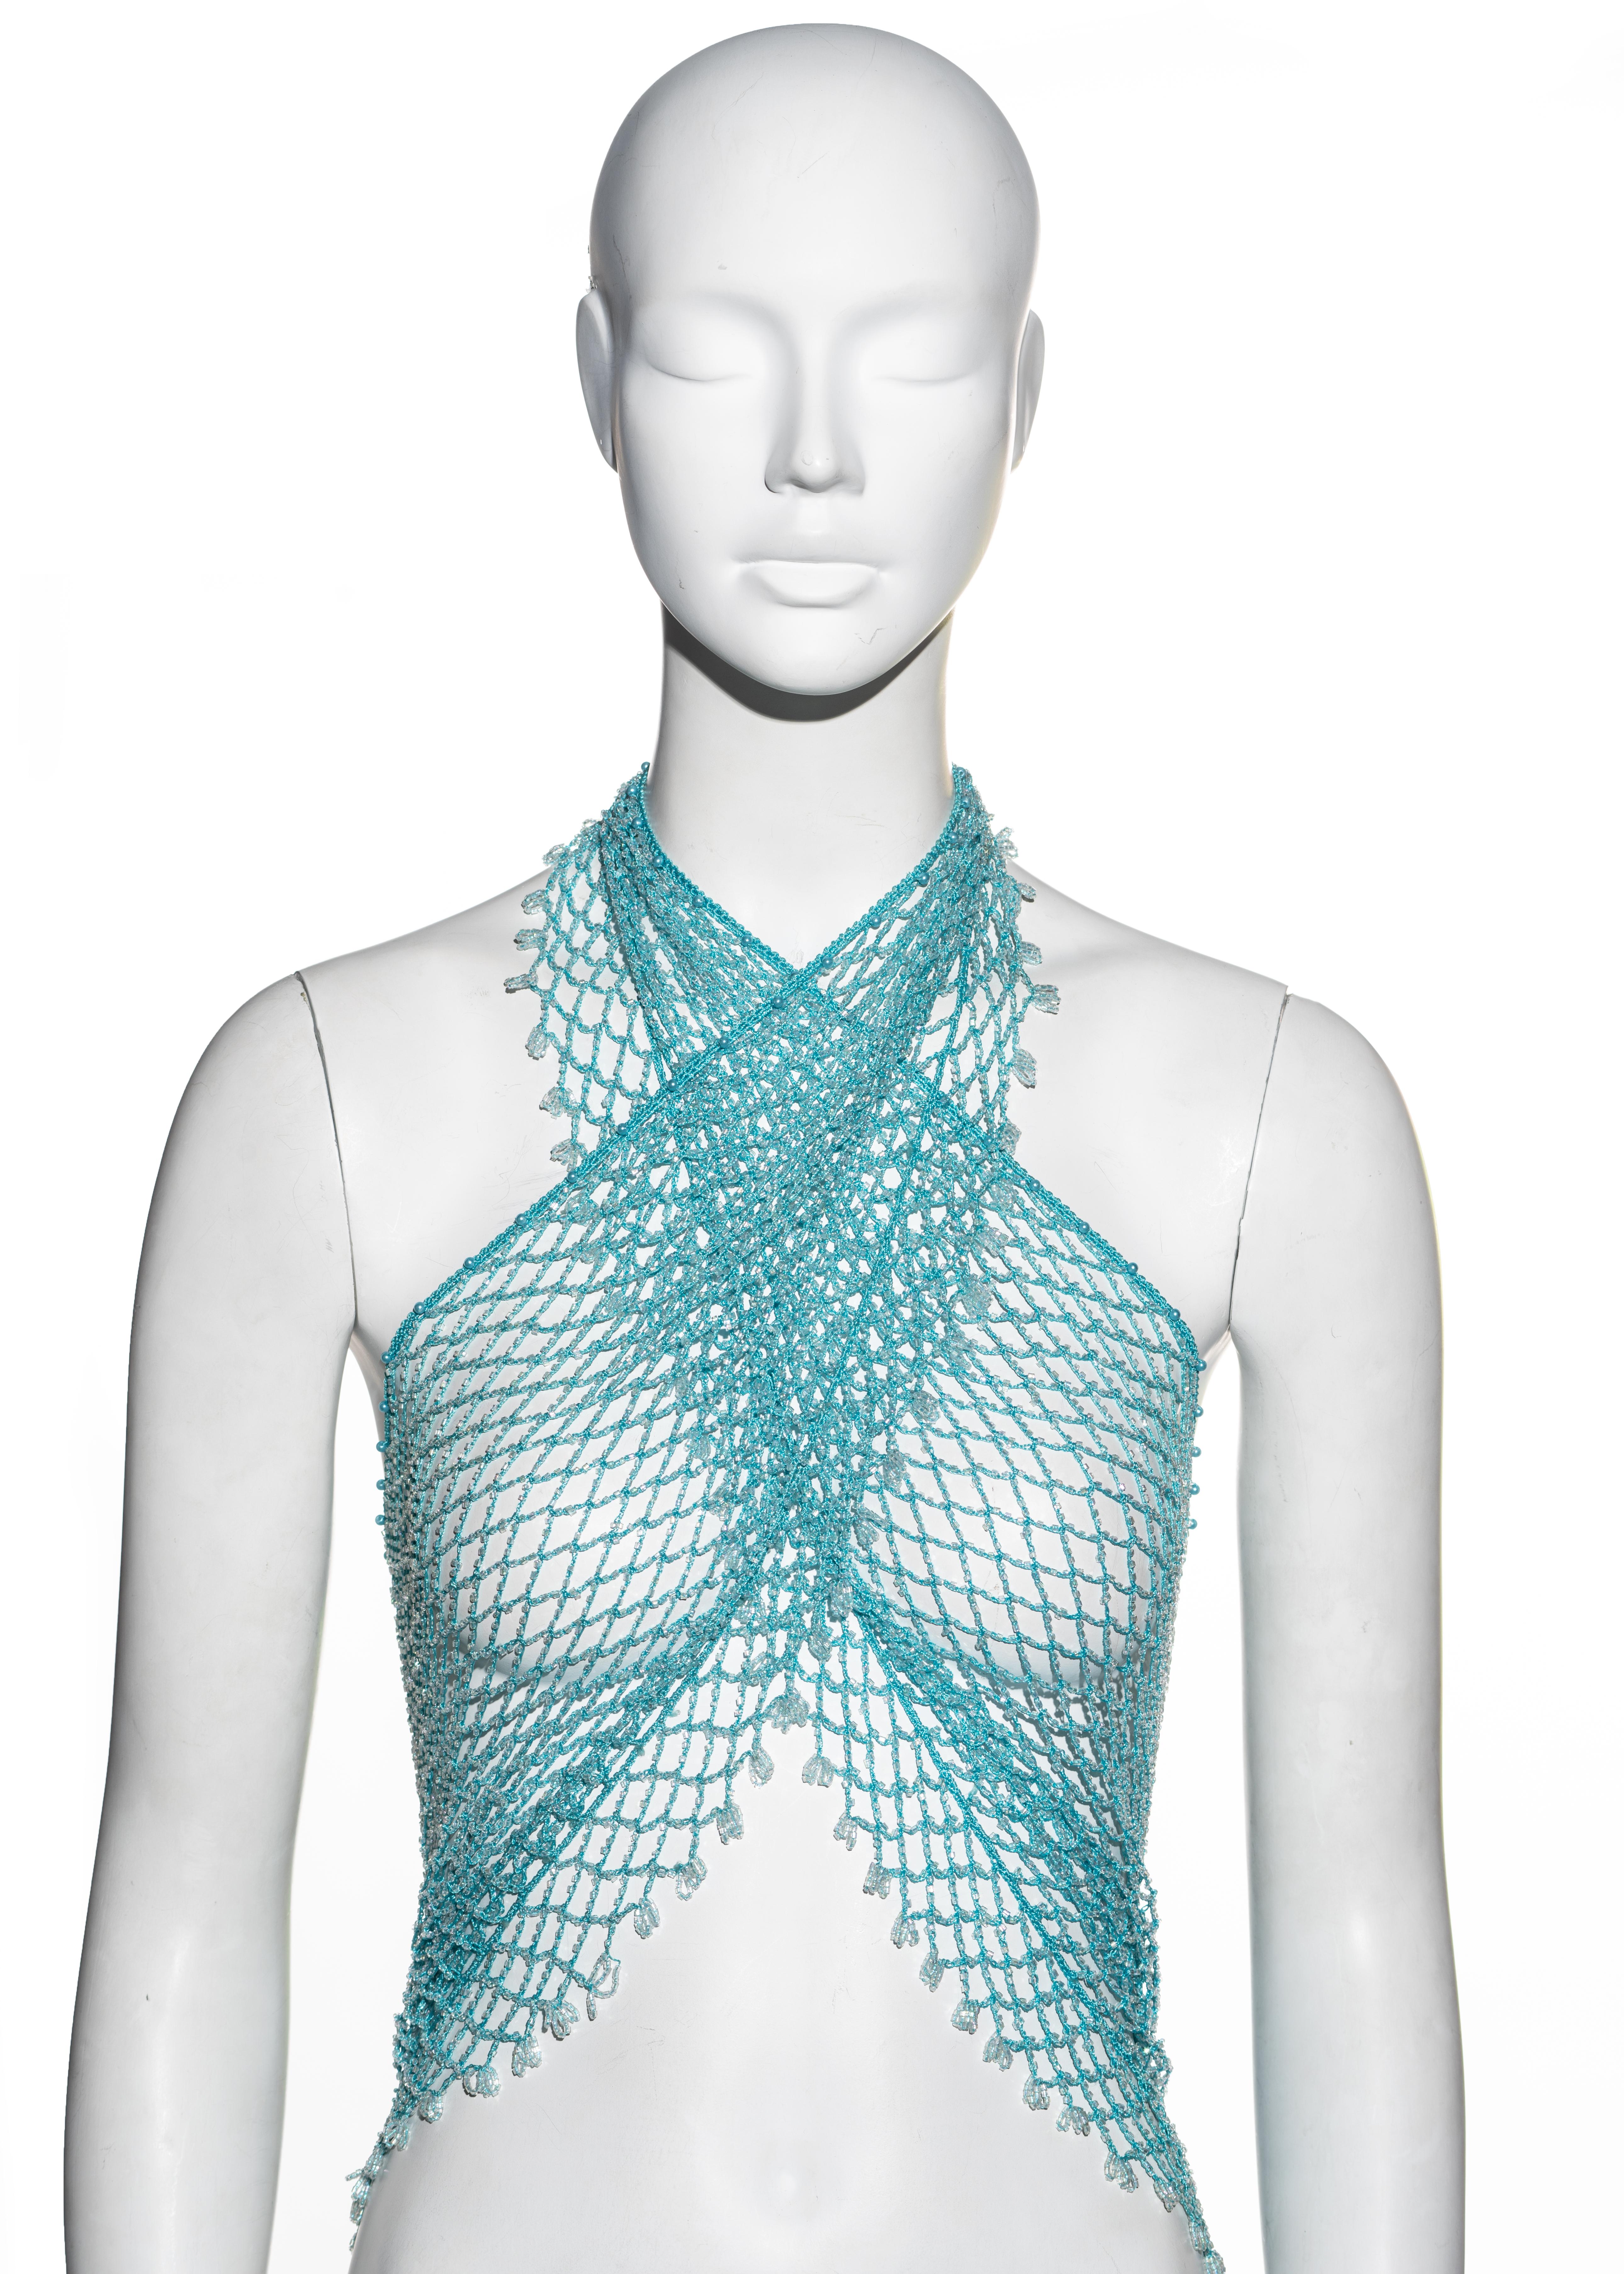 ▪ Diorling by Christian Dior blue beaded crochet scarf
▪ The scarf is multifunctional and can be worn as a halter top, bandeau top, sarong, mini skirt and headscarf
▪ Heavily beaded with clear beads 
▪ Loop tassel trim 
▪ The Diorling line was